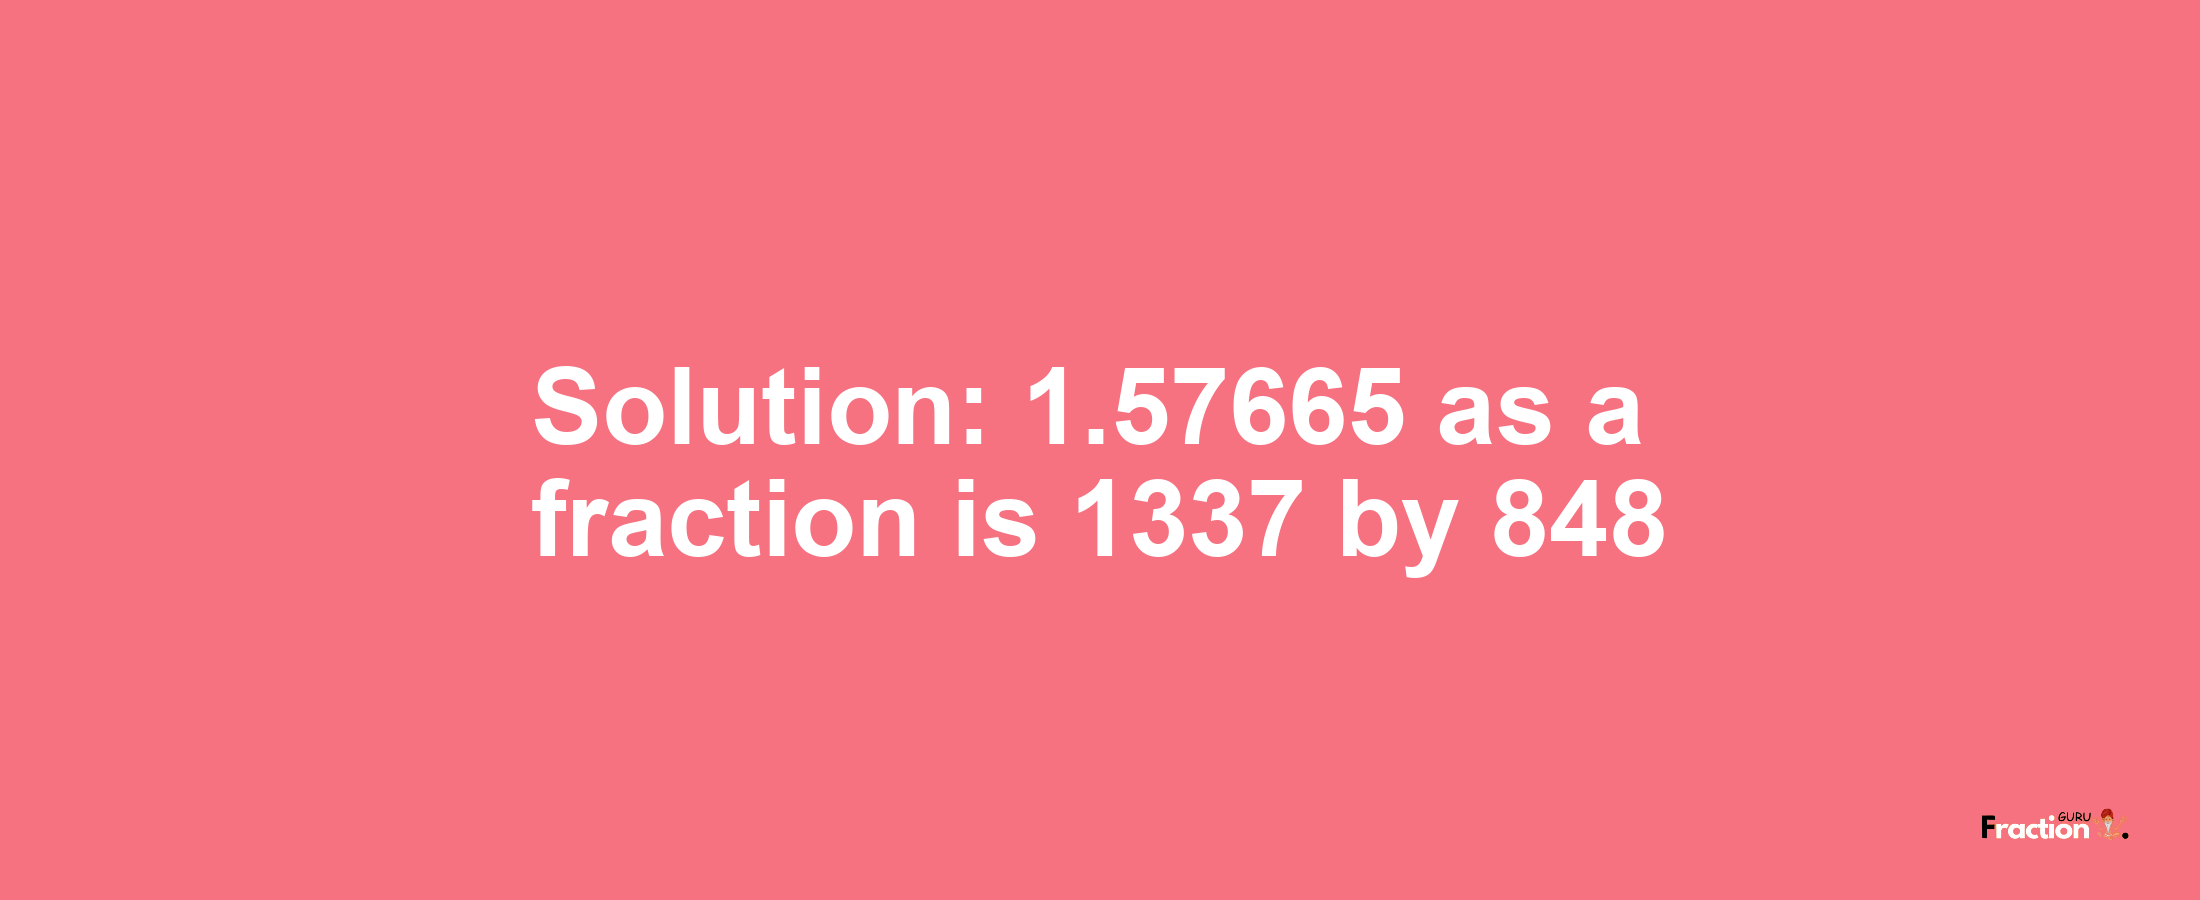 Solution:1.57665 as a fraction is 1337/848